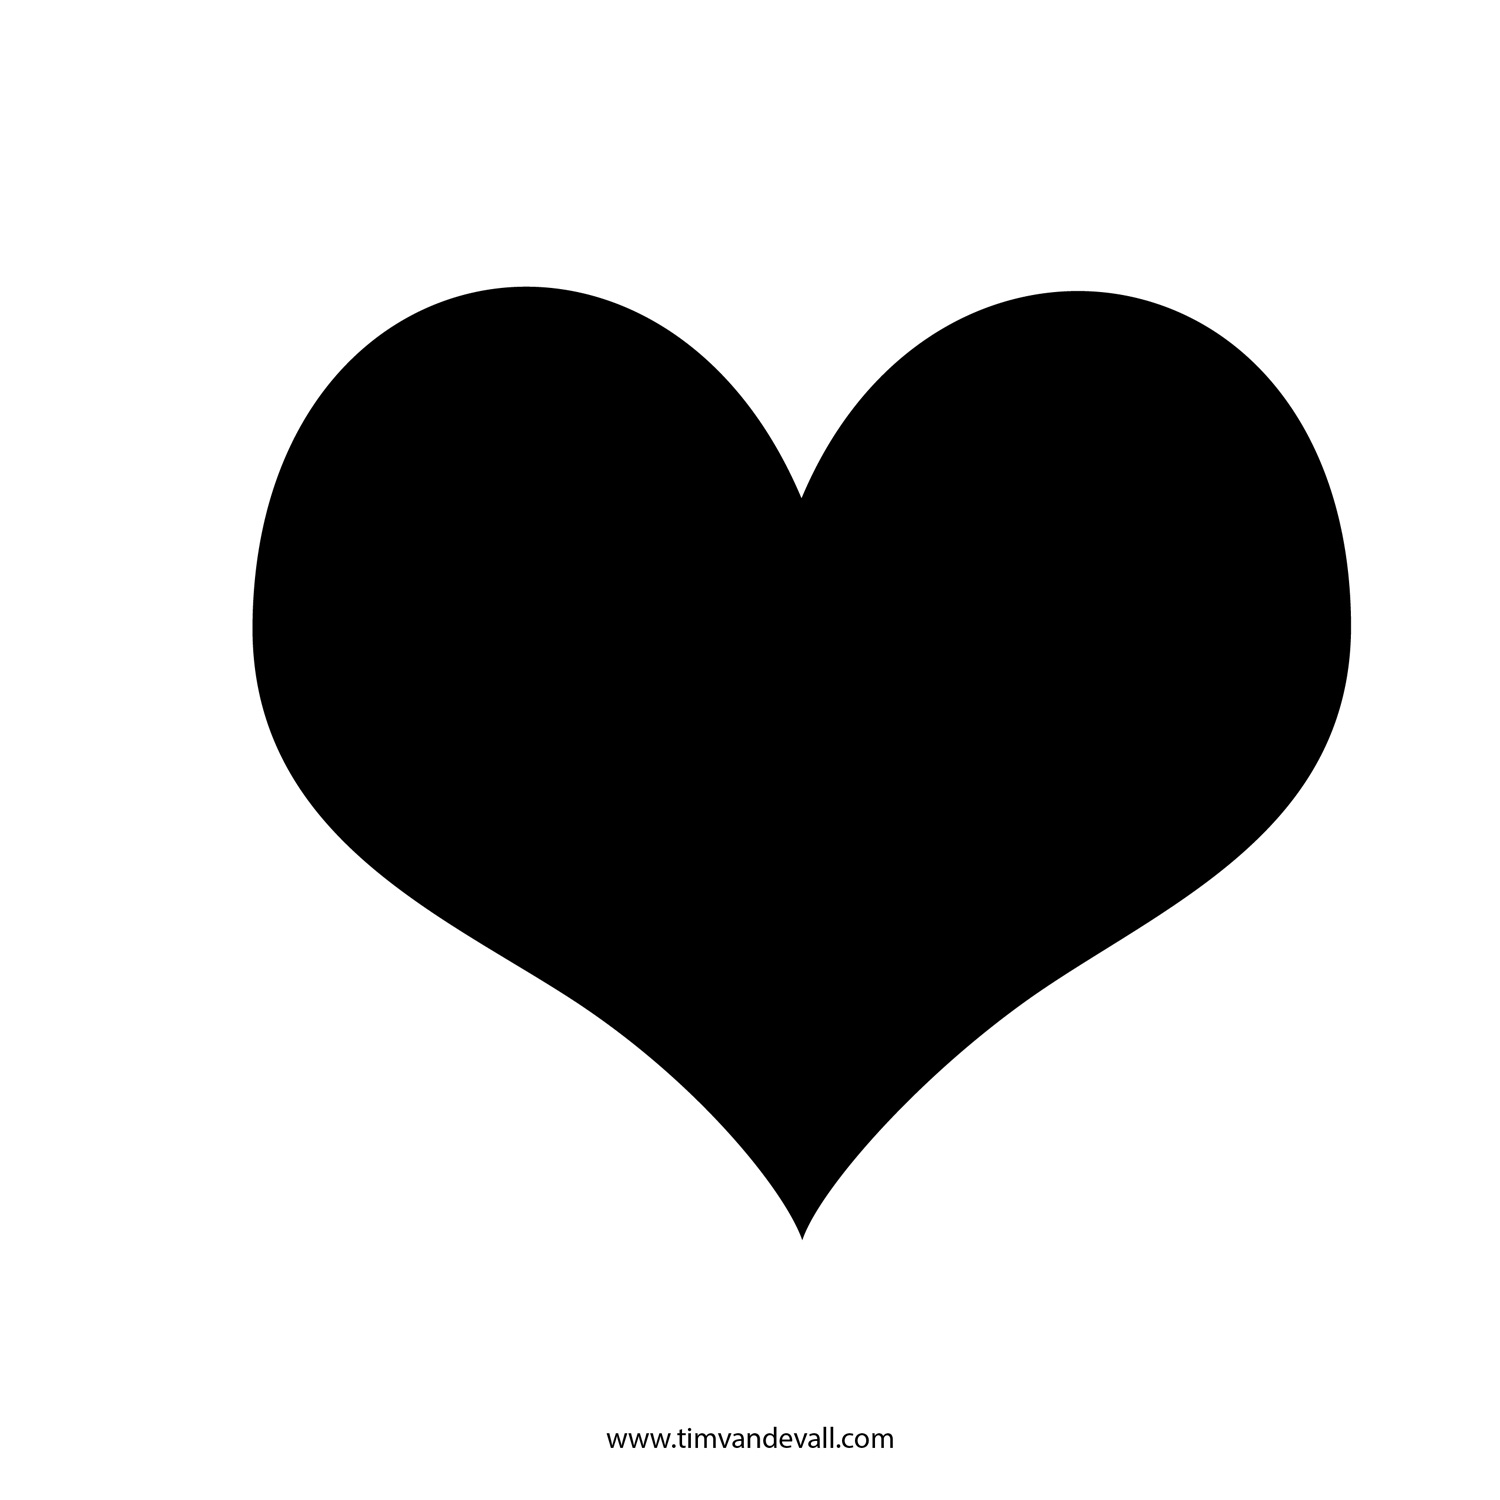 7-best-images-of-large-printable-heart-stencil-large-heart-stencil-template-large-heart